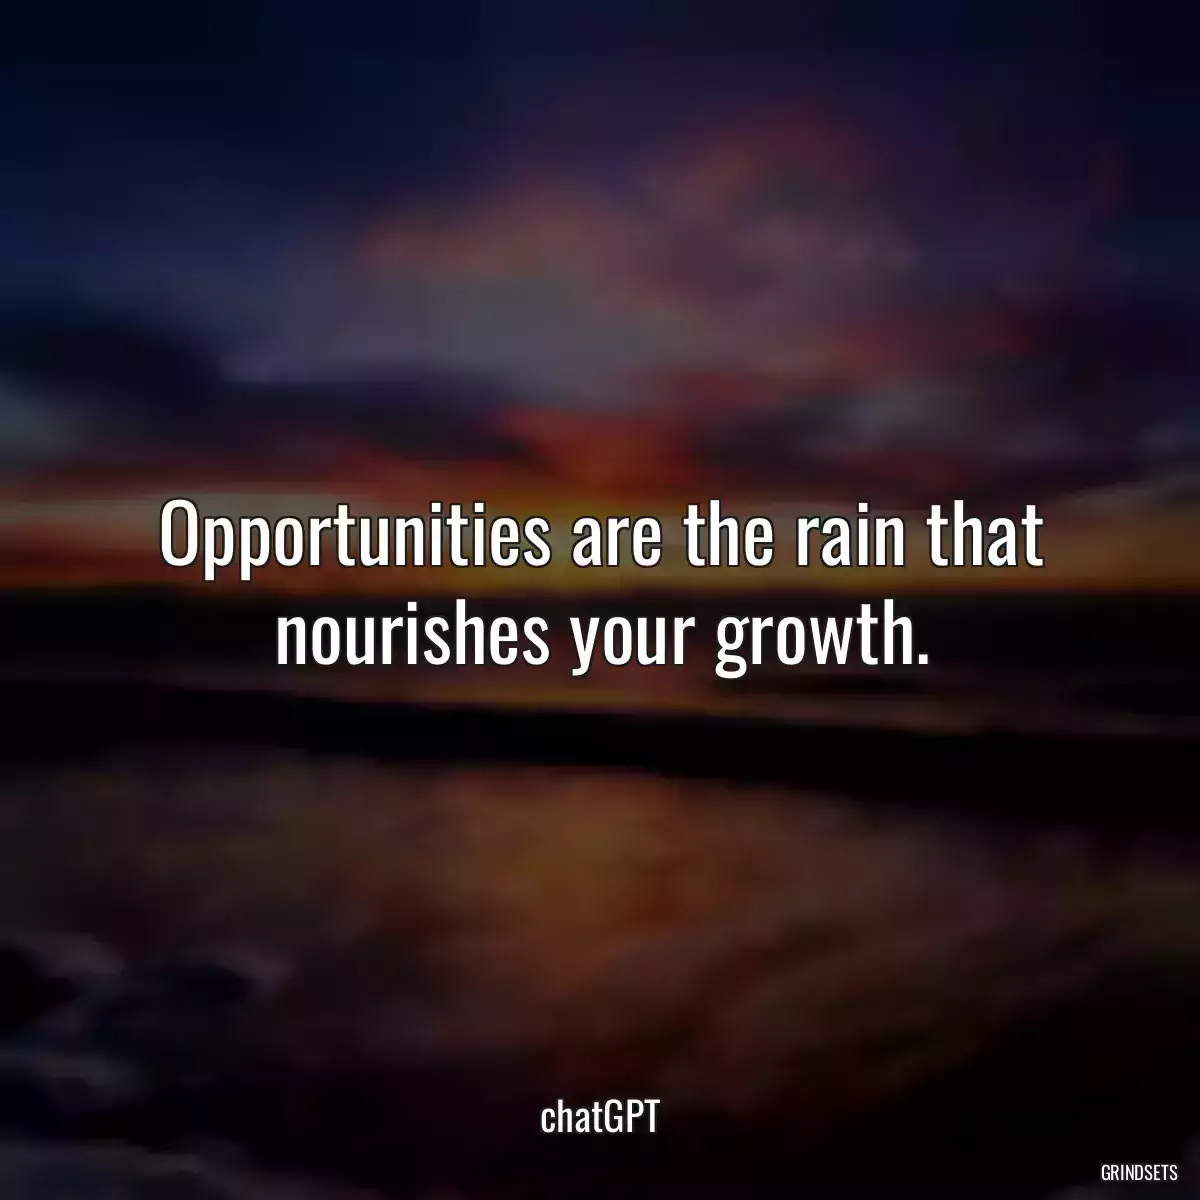 Opportunities are the rain that nourishes your growth.